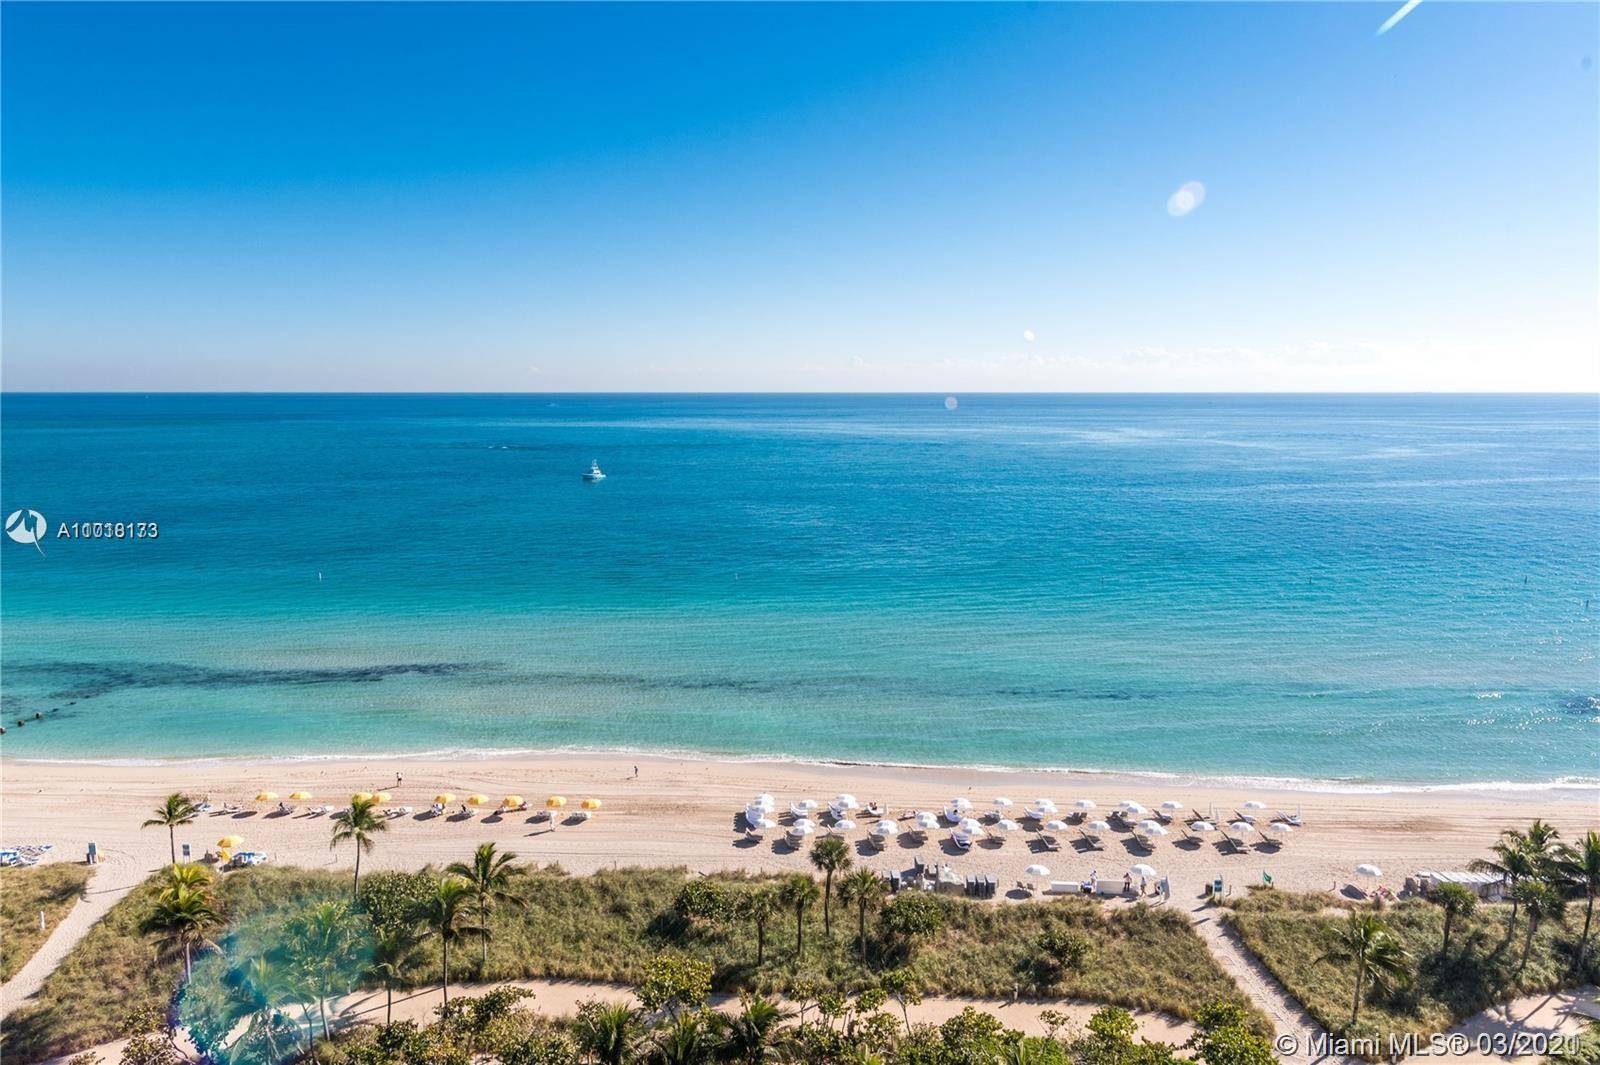 Enjoy living in the prestigious Balmoral condominium located in the heart of Bal Harbour and across the street from the exclusive Bal Harbour Shops.